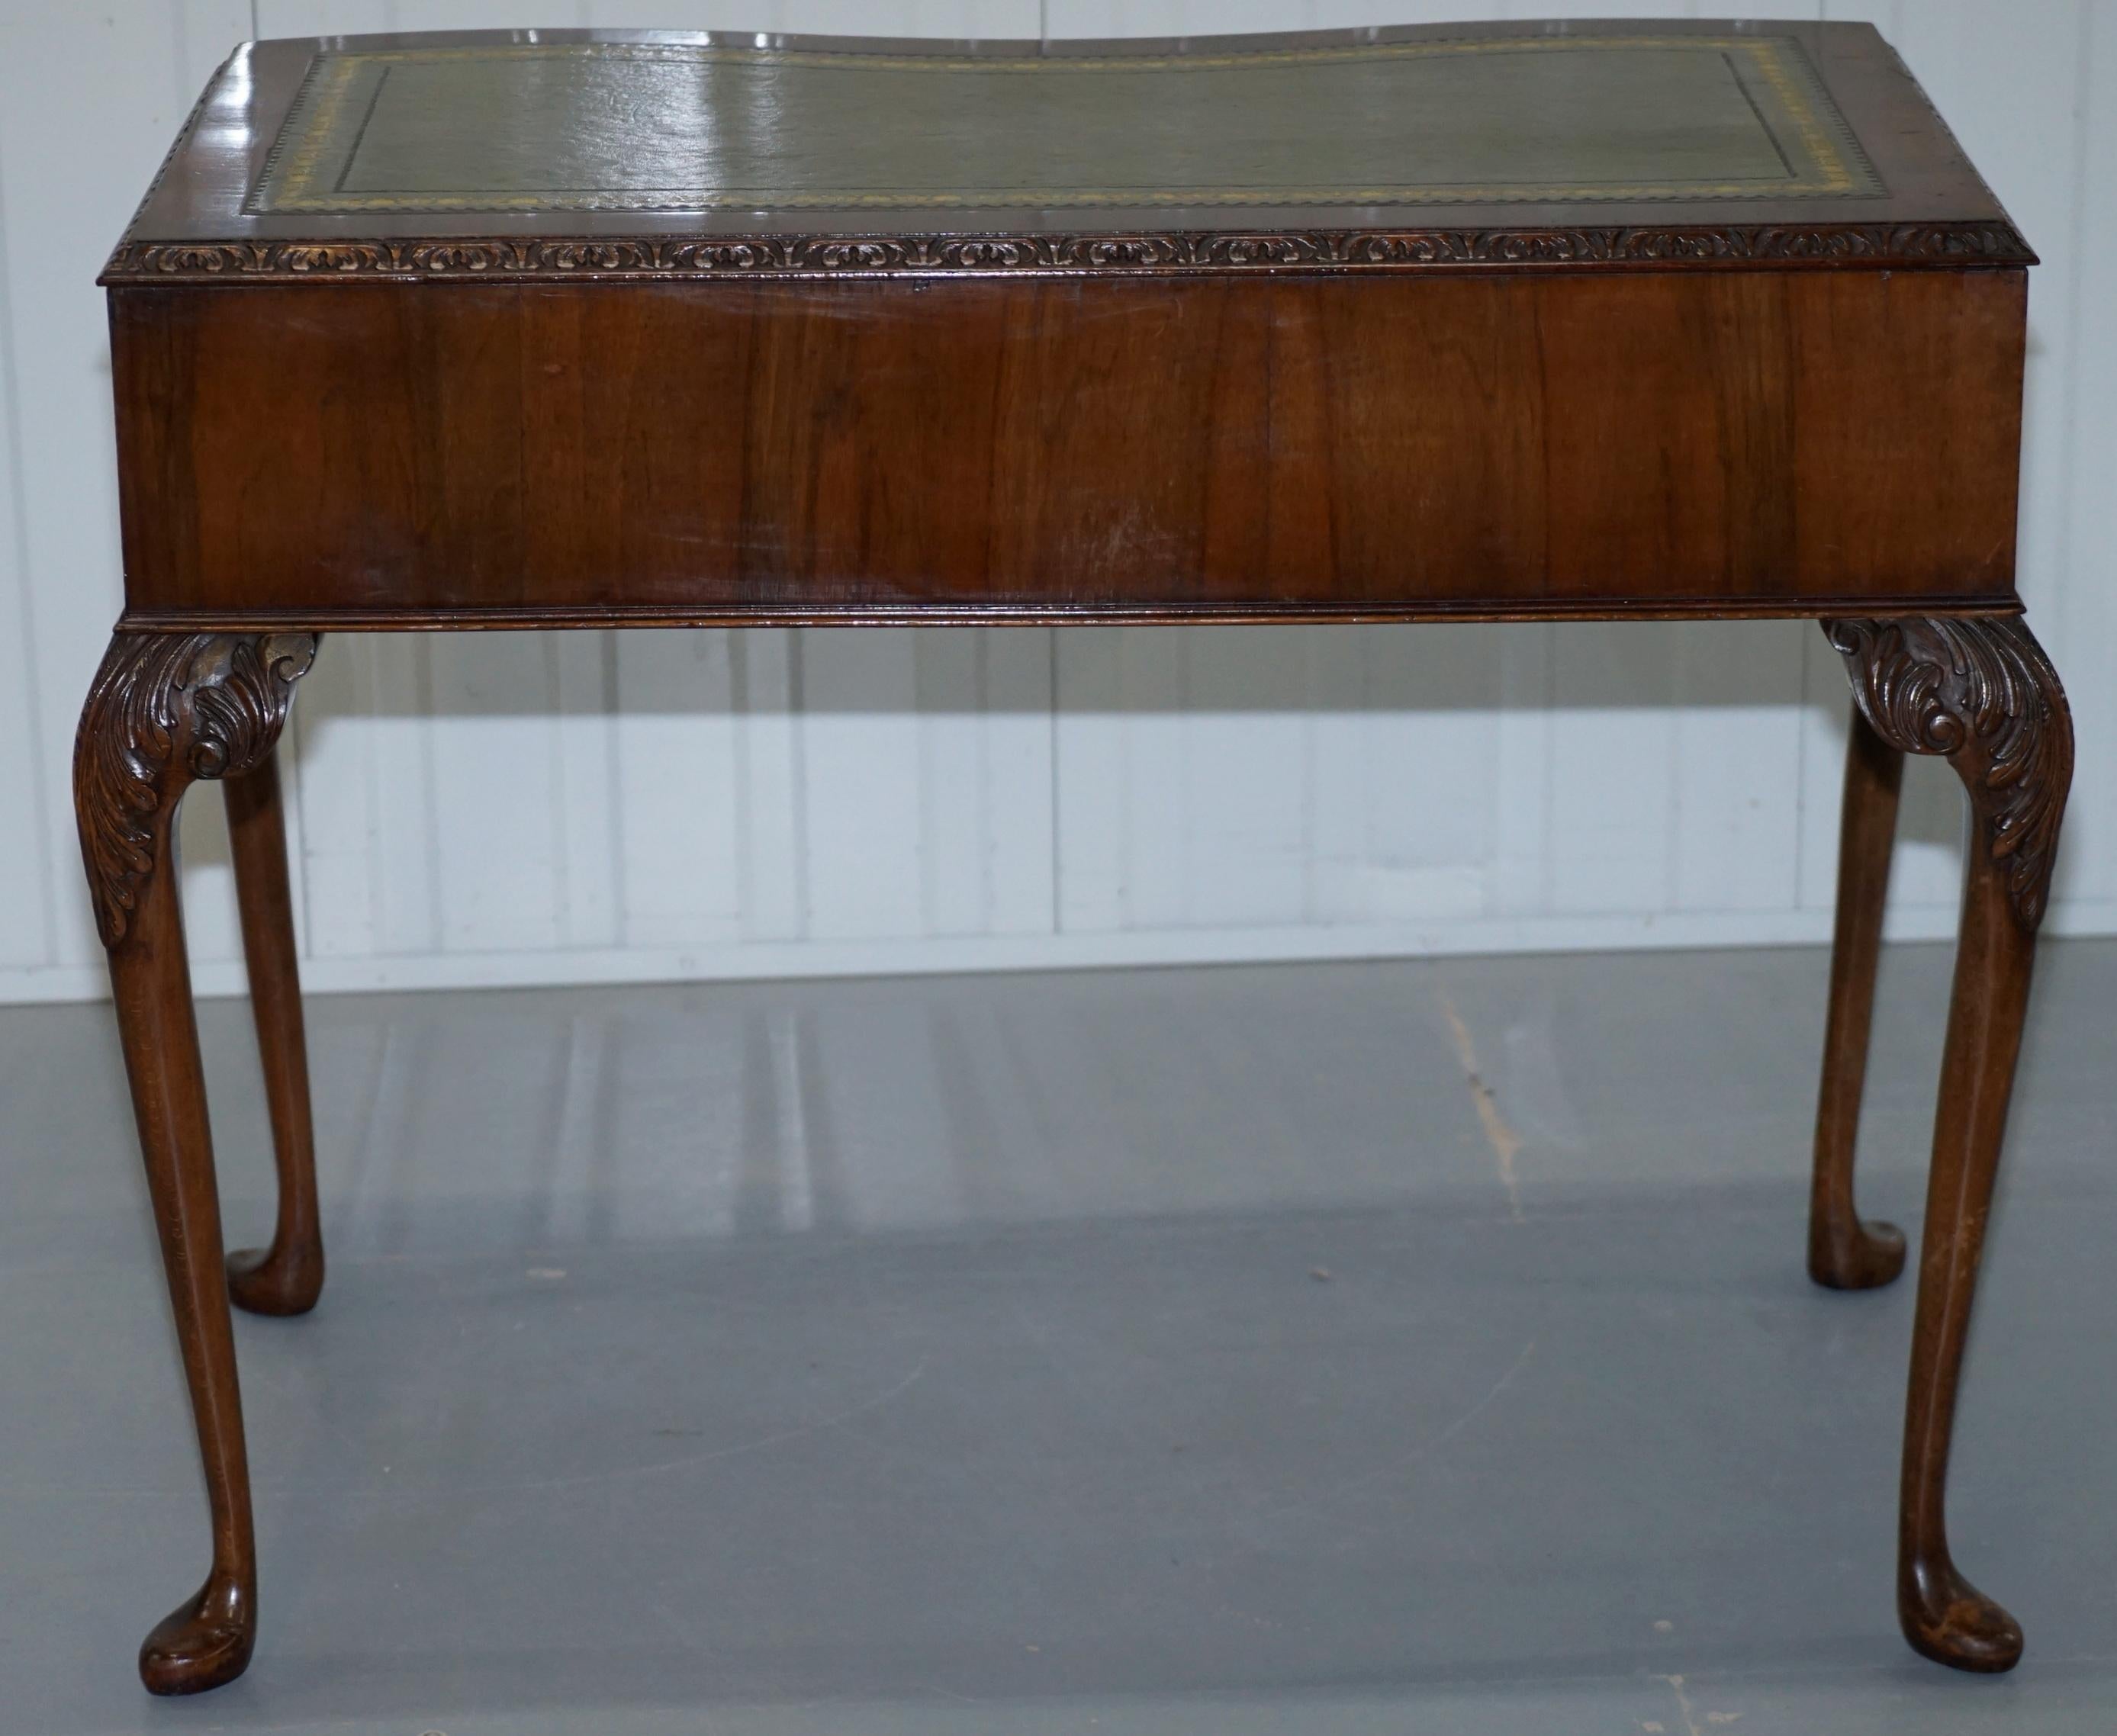 Stunning Queen Anne Pad Foot Walnut Writing Hall Console Table Desk Leather Top 7